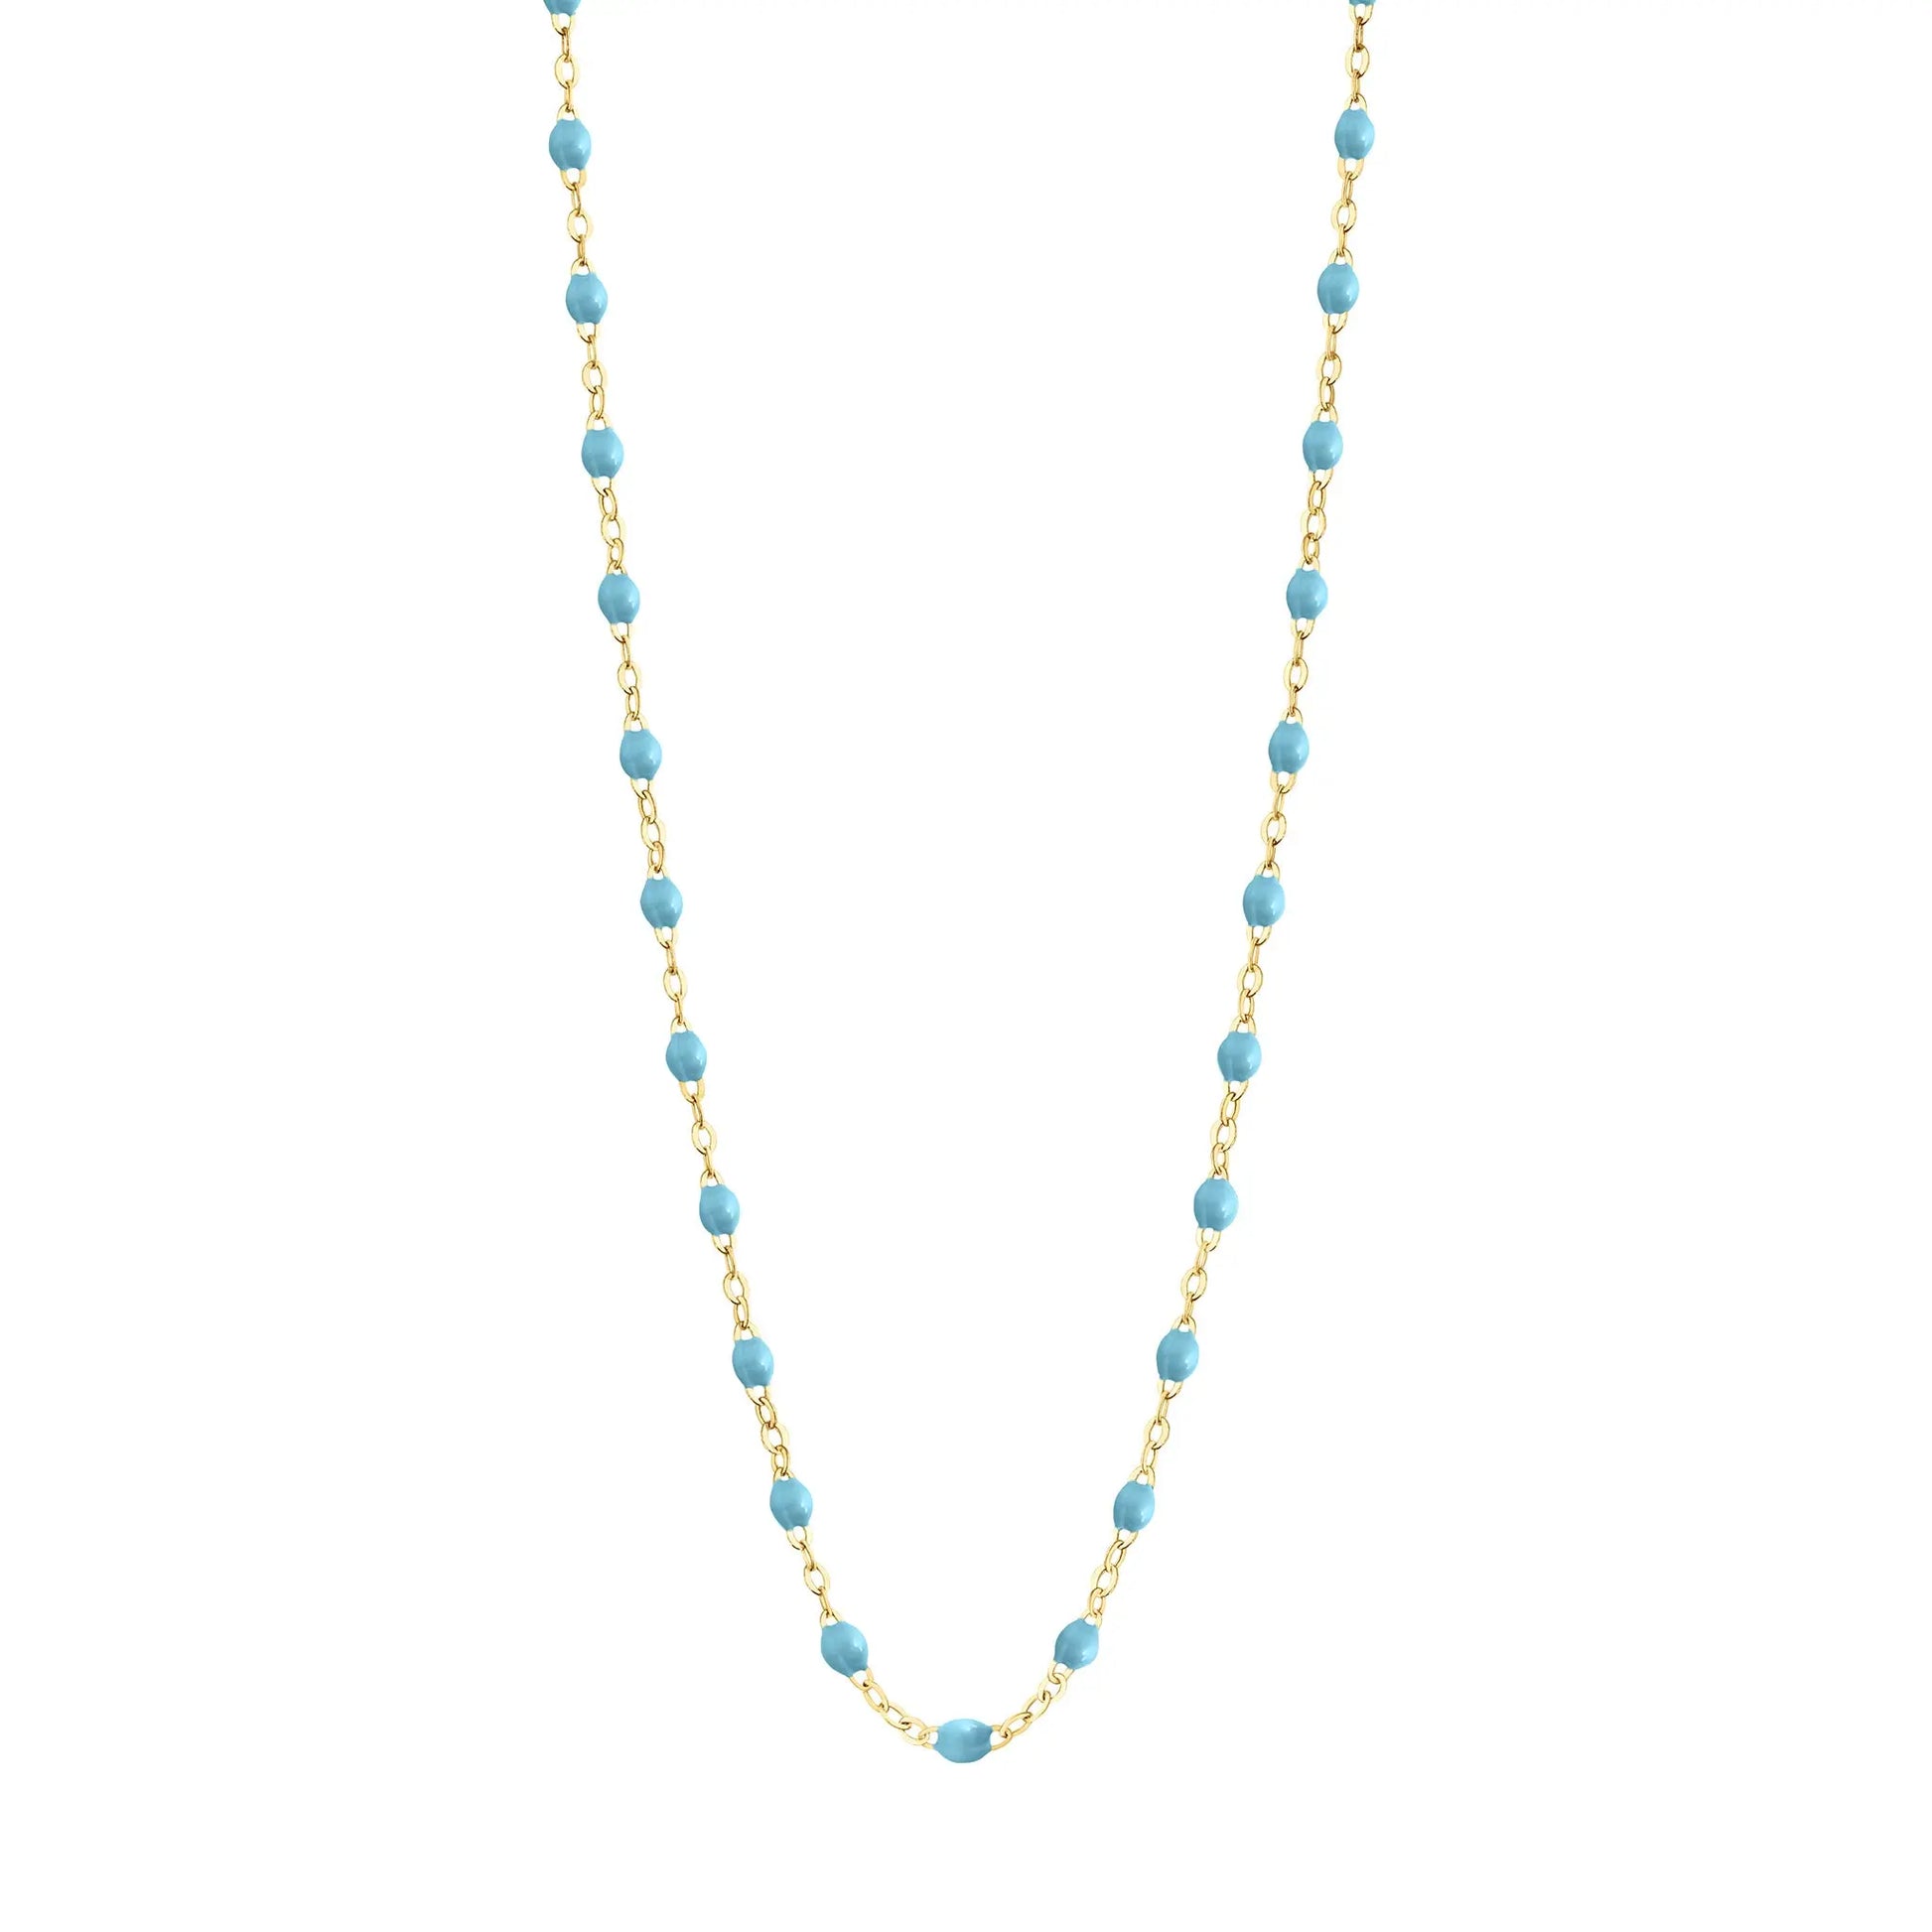 Stack you necklace layers with this versatile beaded chain! The Classic Gigi Necklace by gigi CLOZEAU features 18 carat yellow gold, and striking Turquoise resin jewels for an everyday effortless appearance. Handcrafted in 18k yellow gold. The beads measure 1.50mm in diameter and is finished with a spring ring clasp. The length is 16.5 inches.